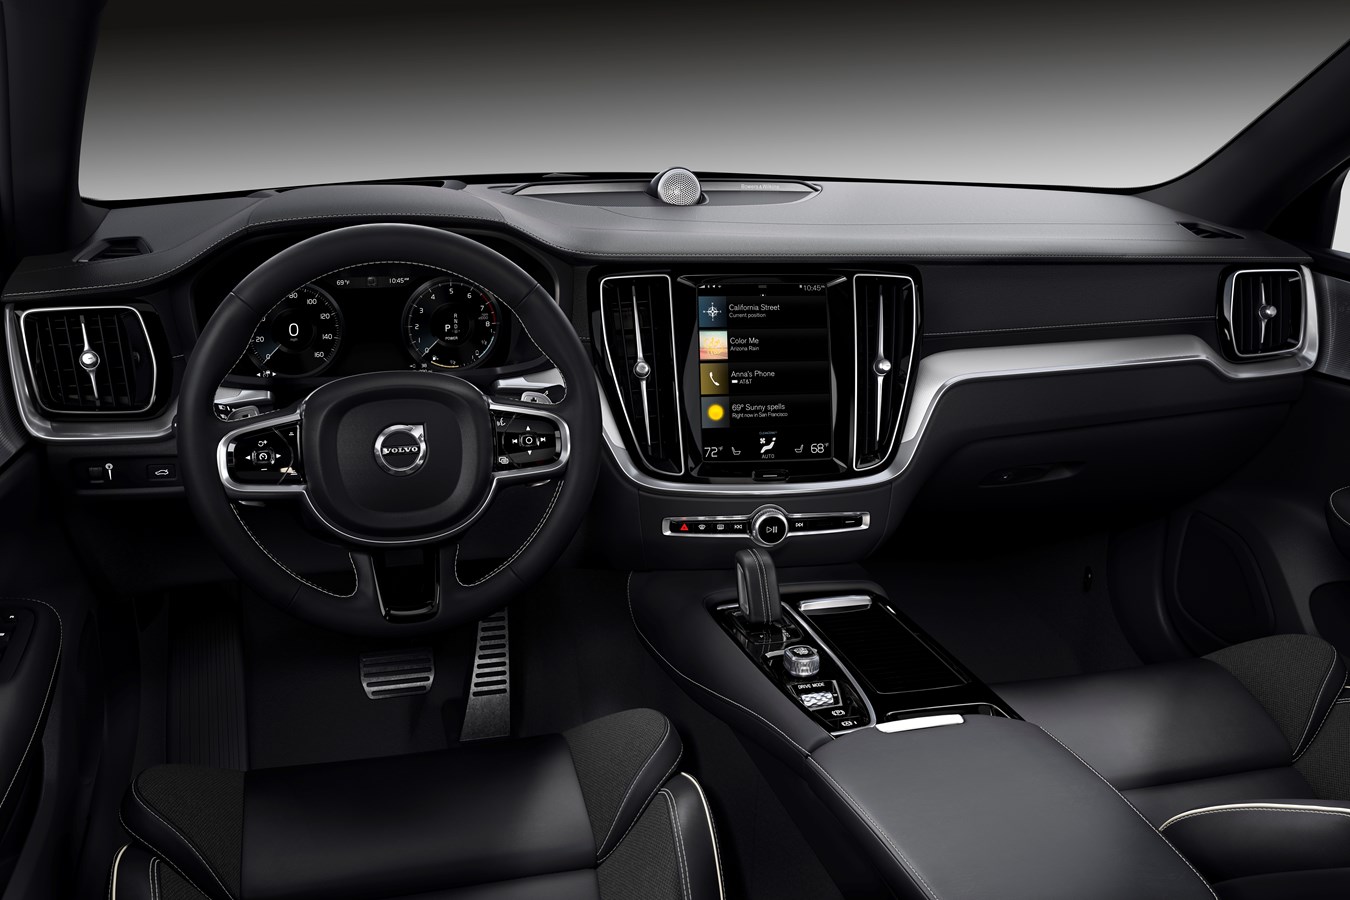 S60/V60 Polestar Engineered, Fine Nappa Leather/Graphite Open Grid Textile Charcoal in Charcoal interior